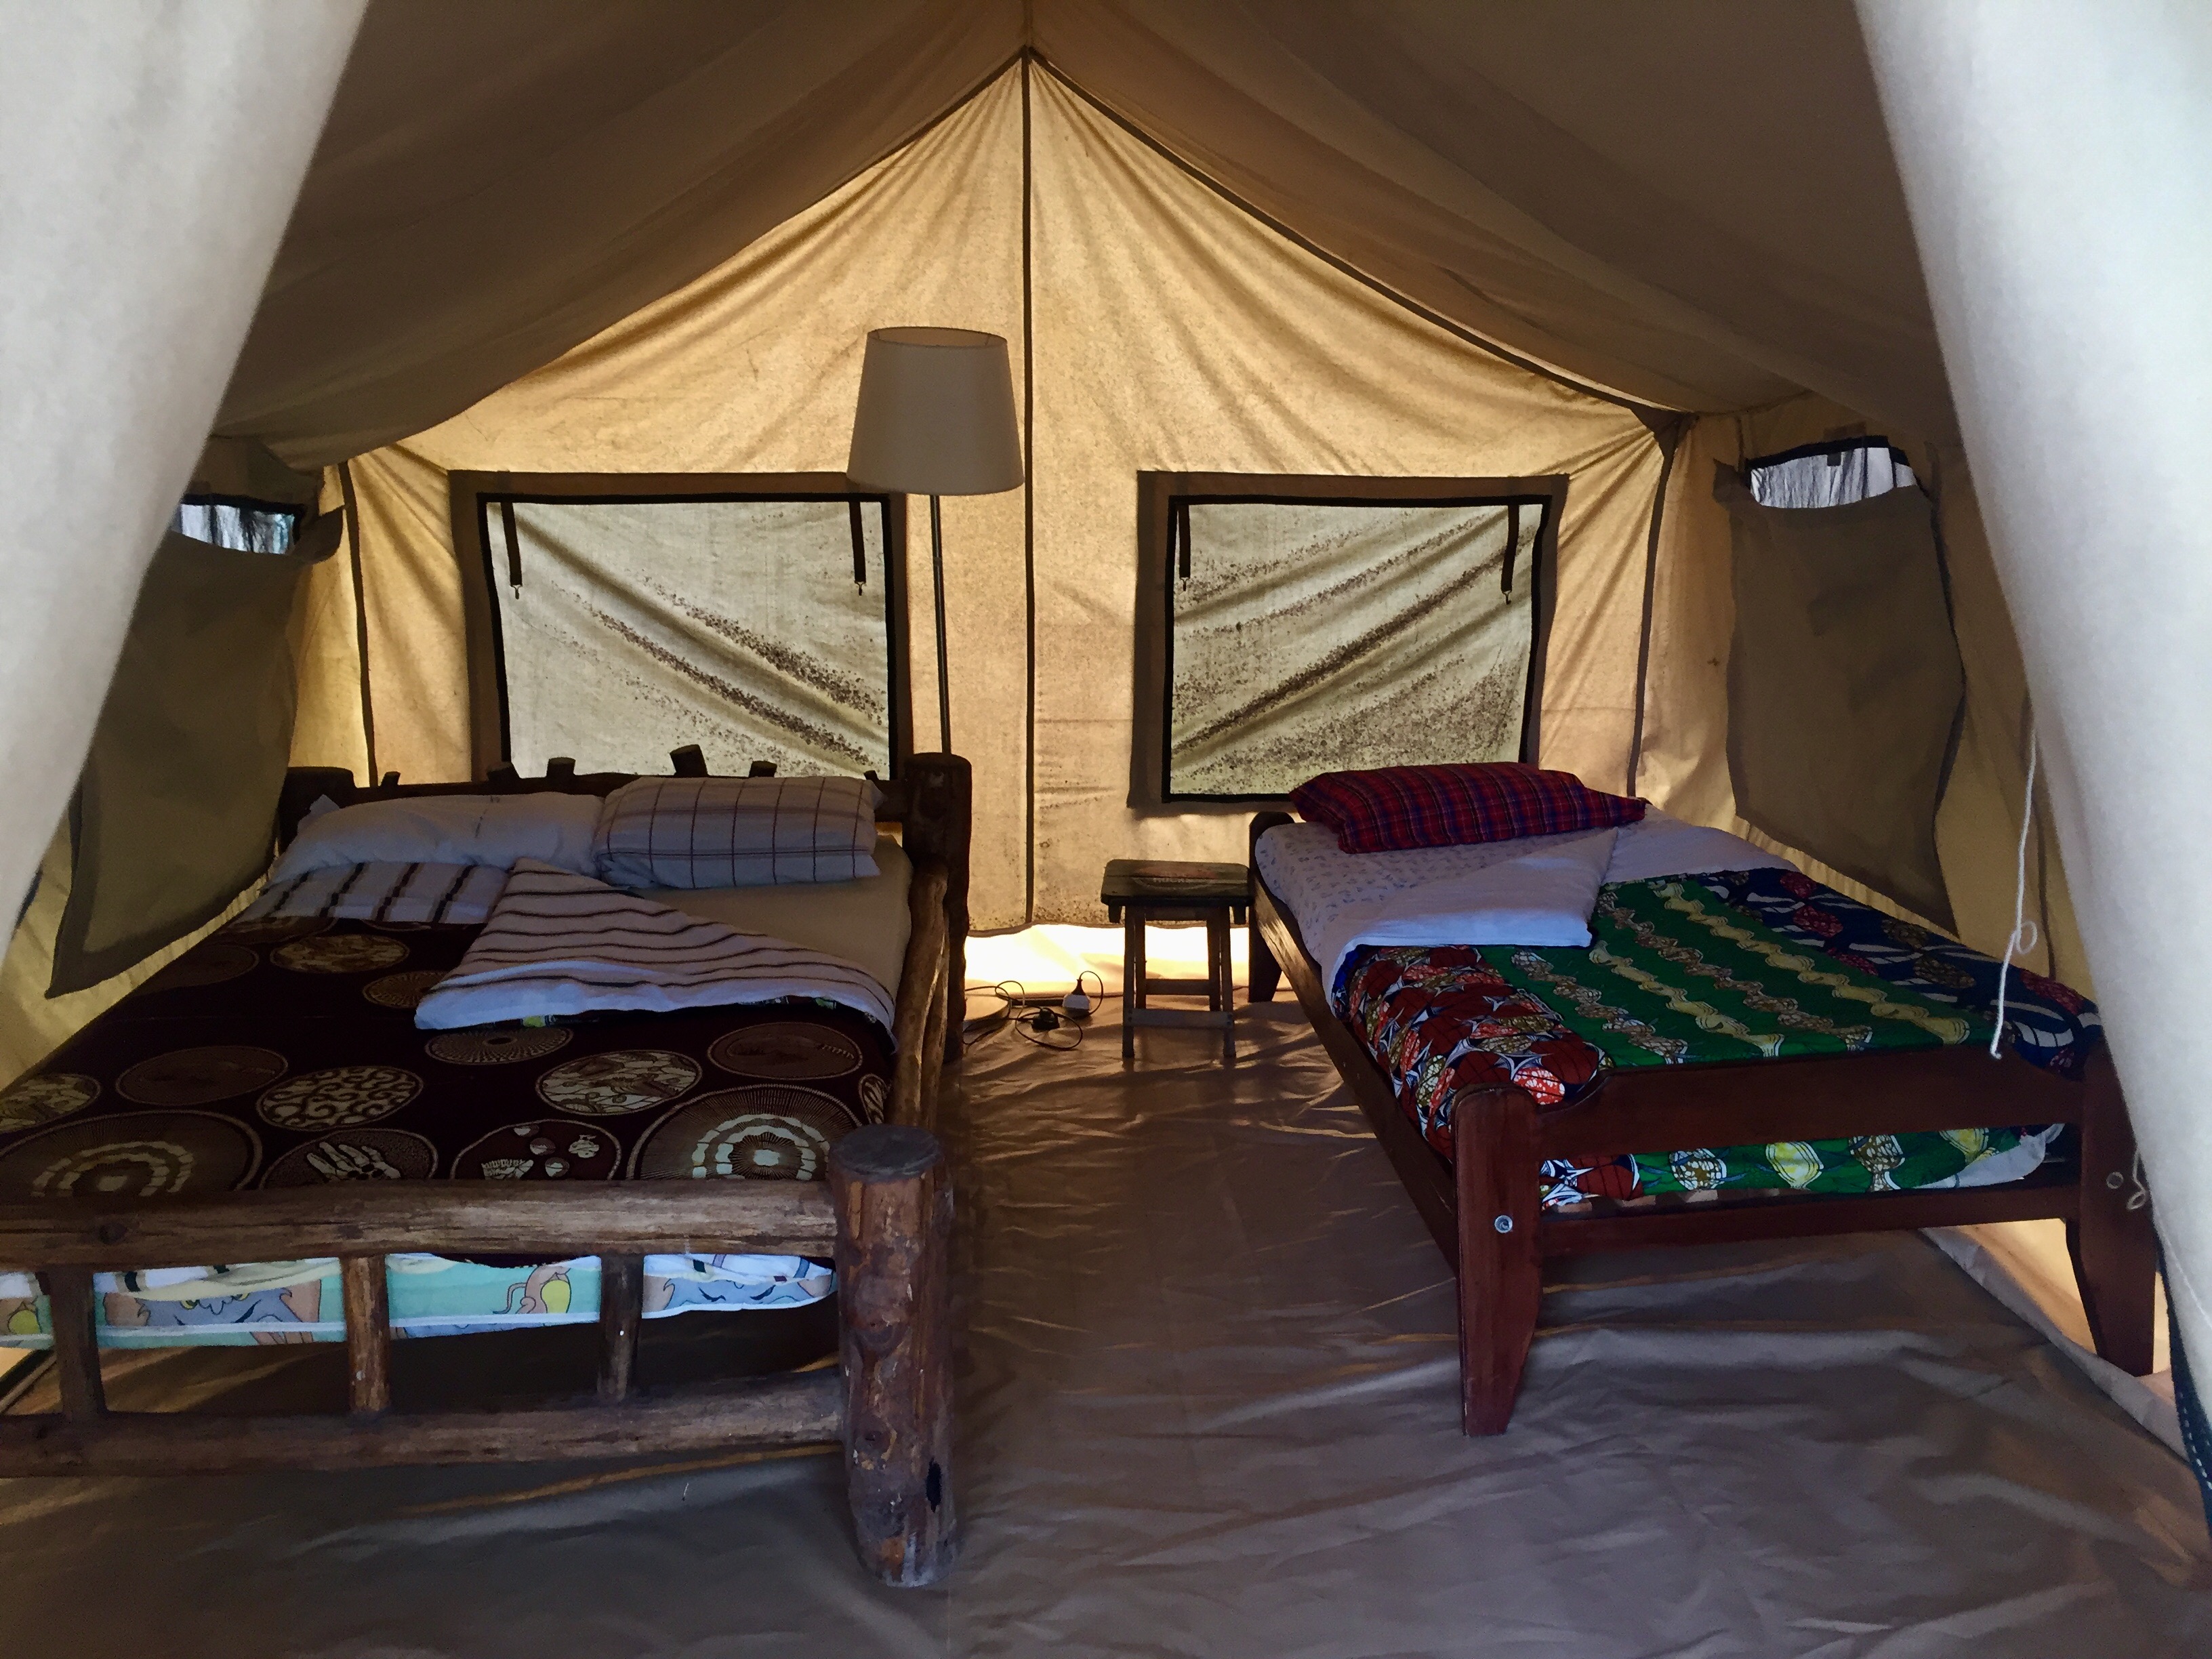 Inside one of the tents.